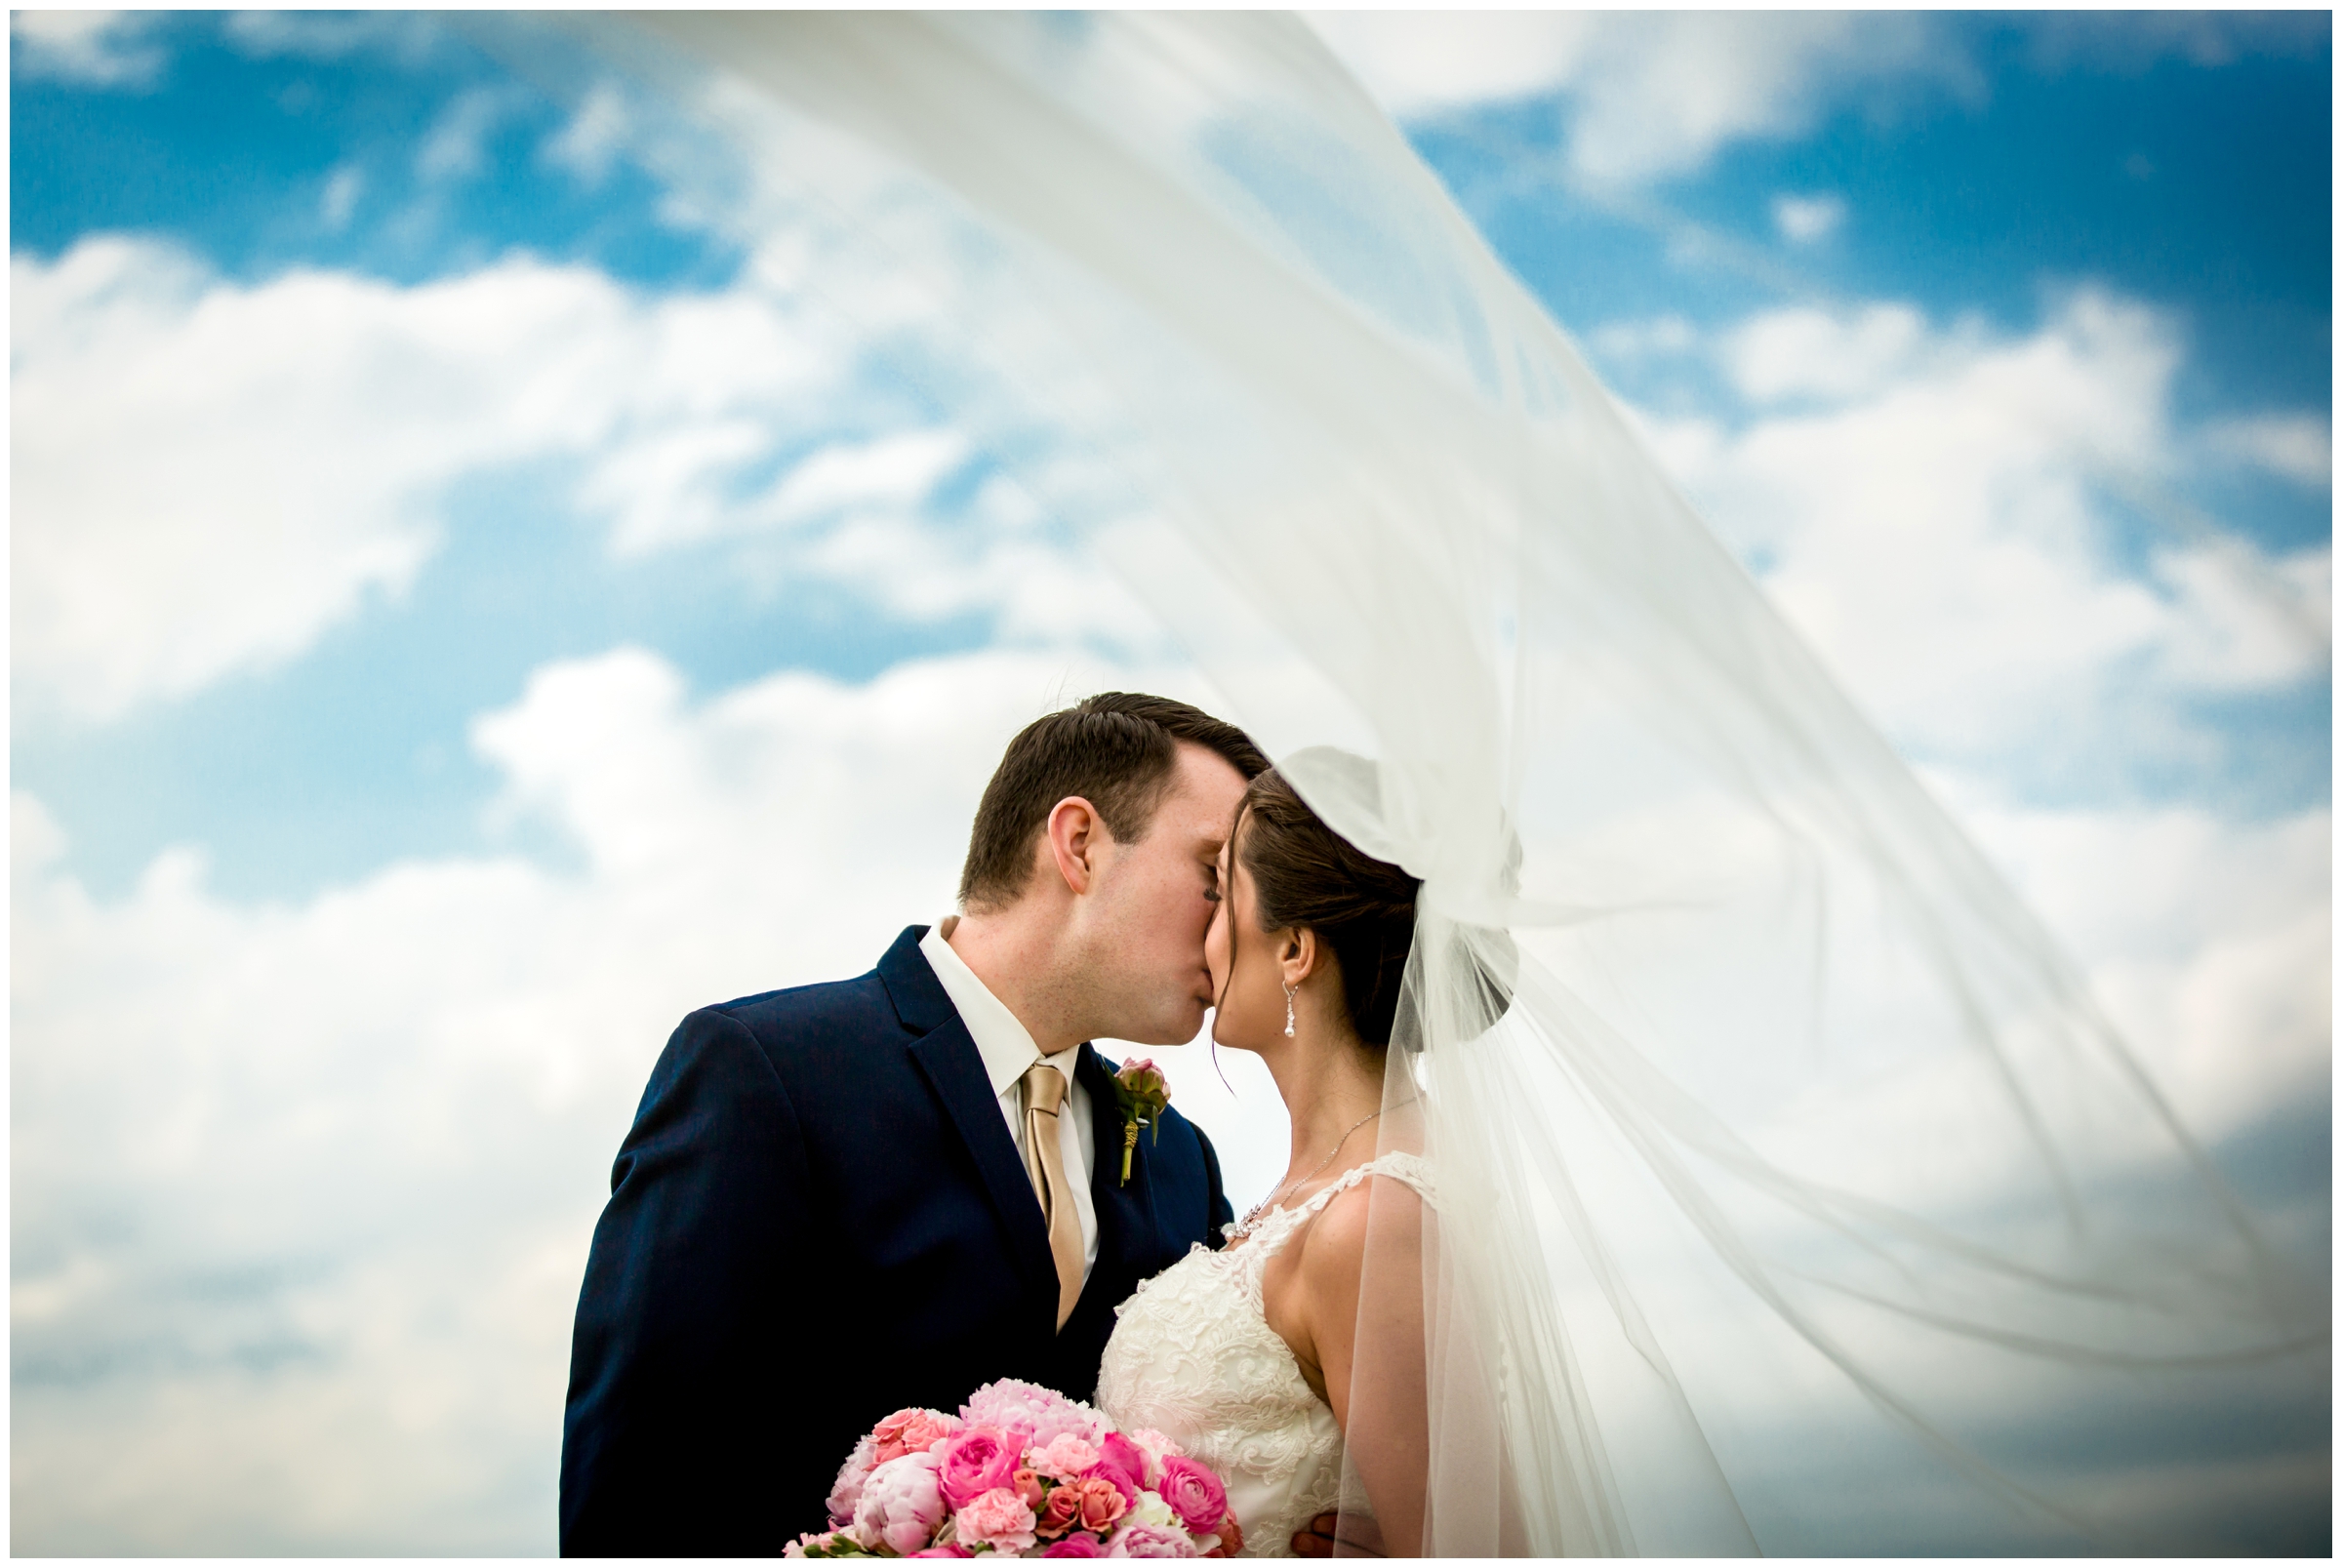 dramatic veil picture at Colorado national golf club wedding by Estes Park Photographer Plum Pretty Photography